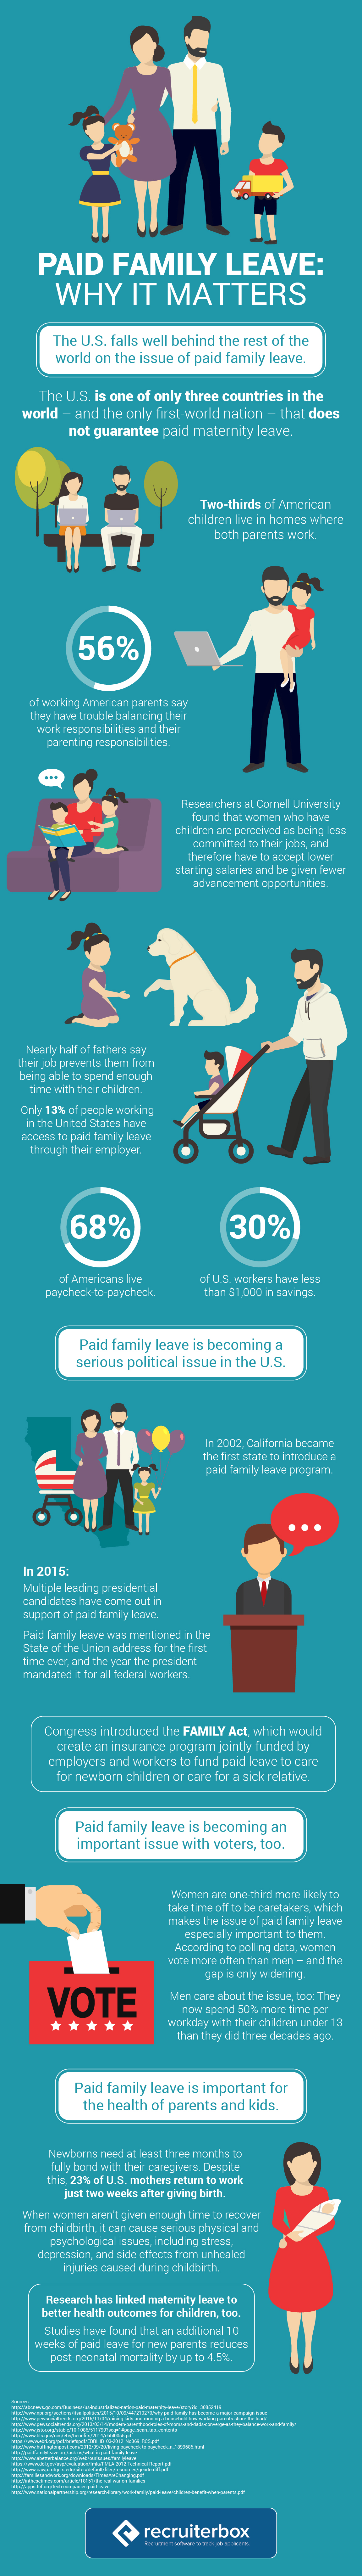 Paid family leave infographic with statistics in the US